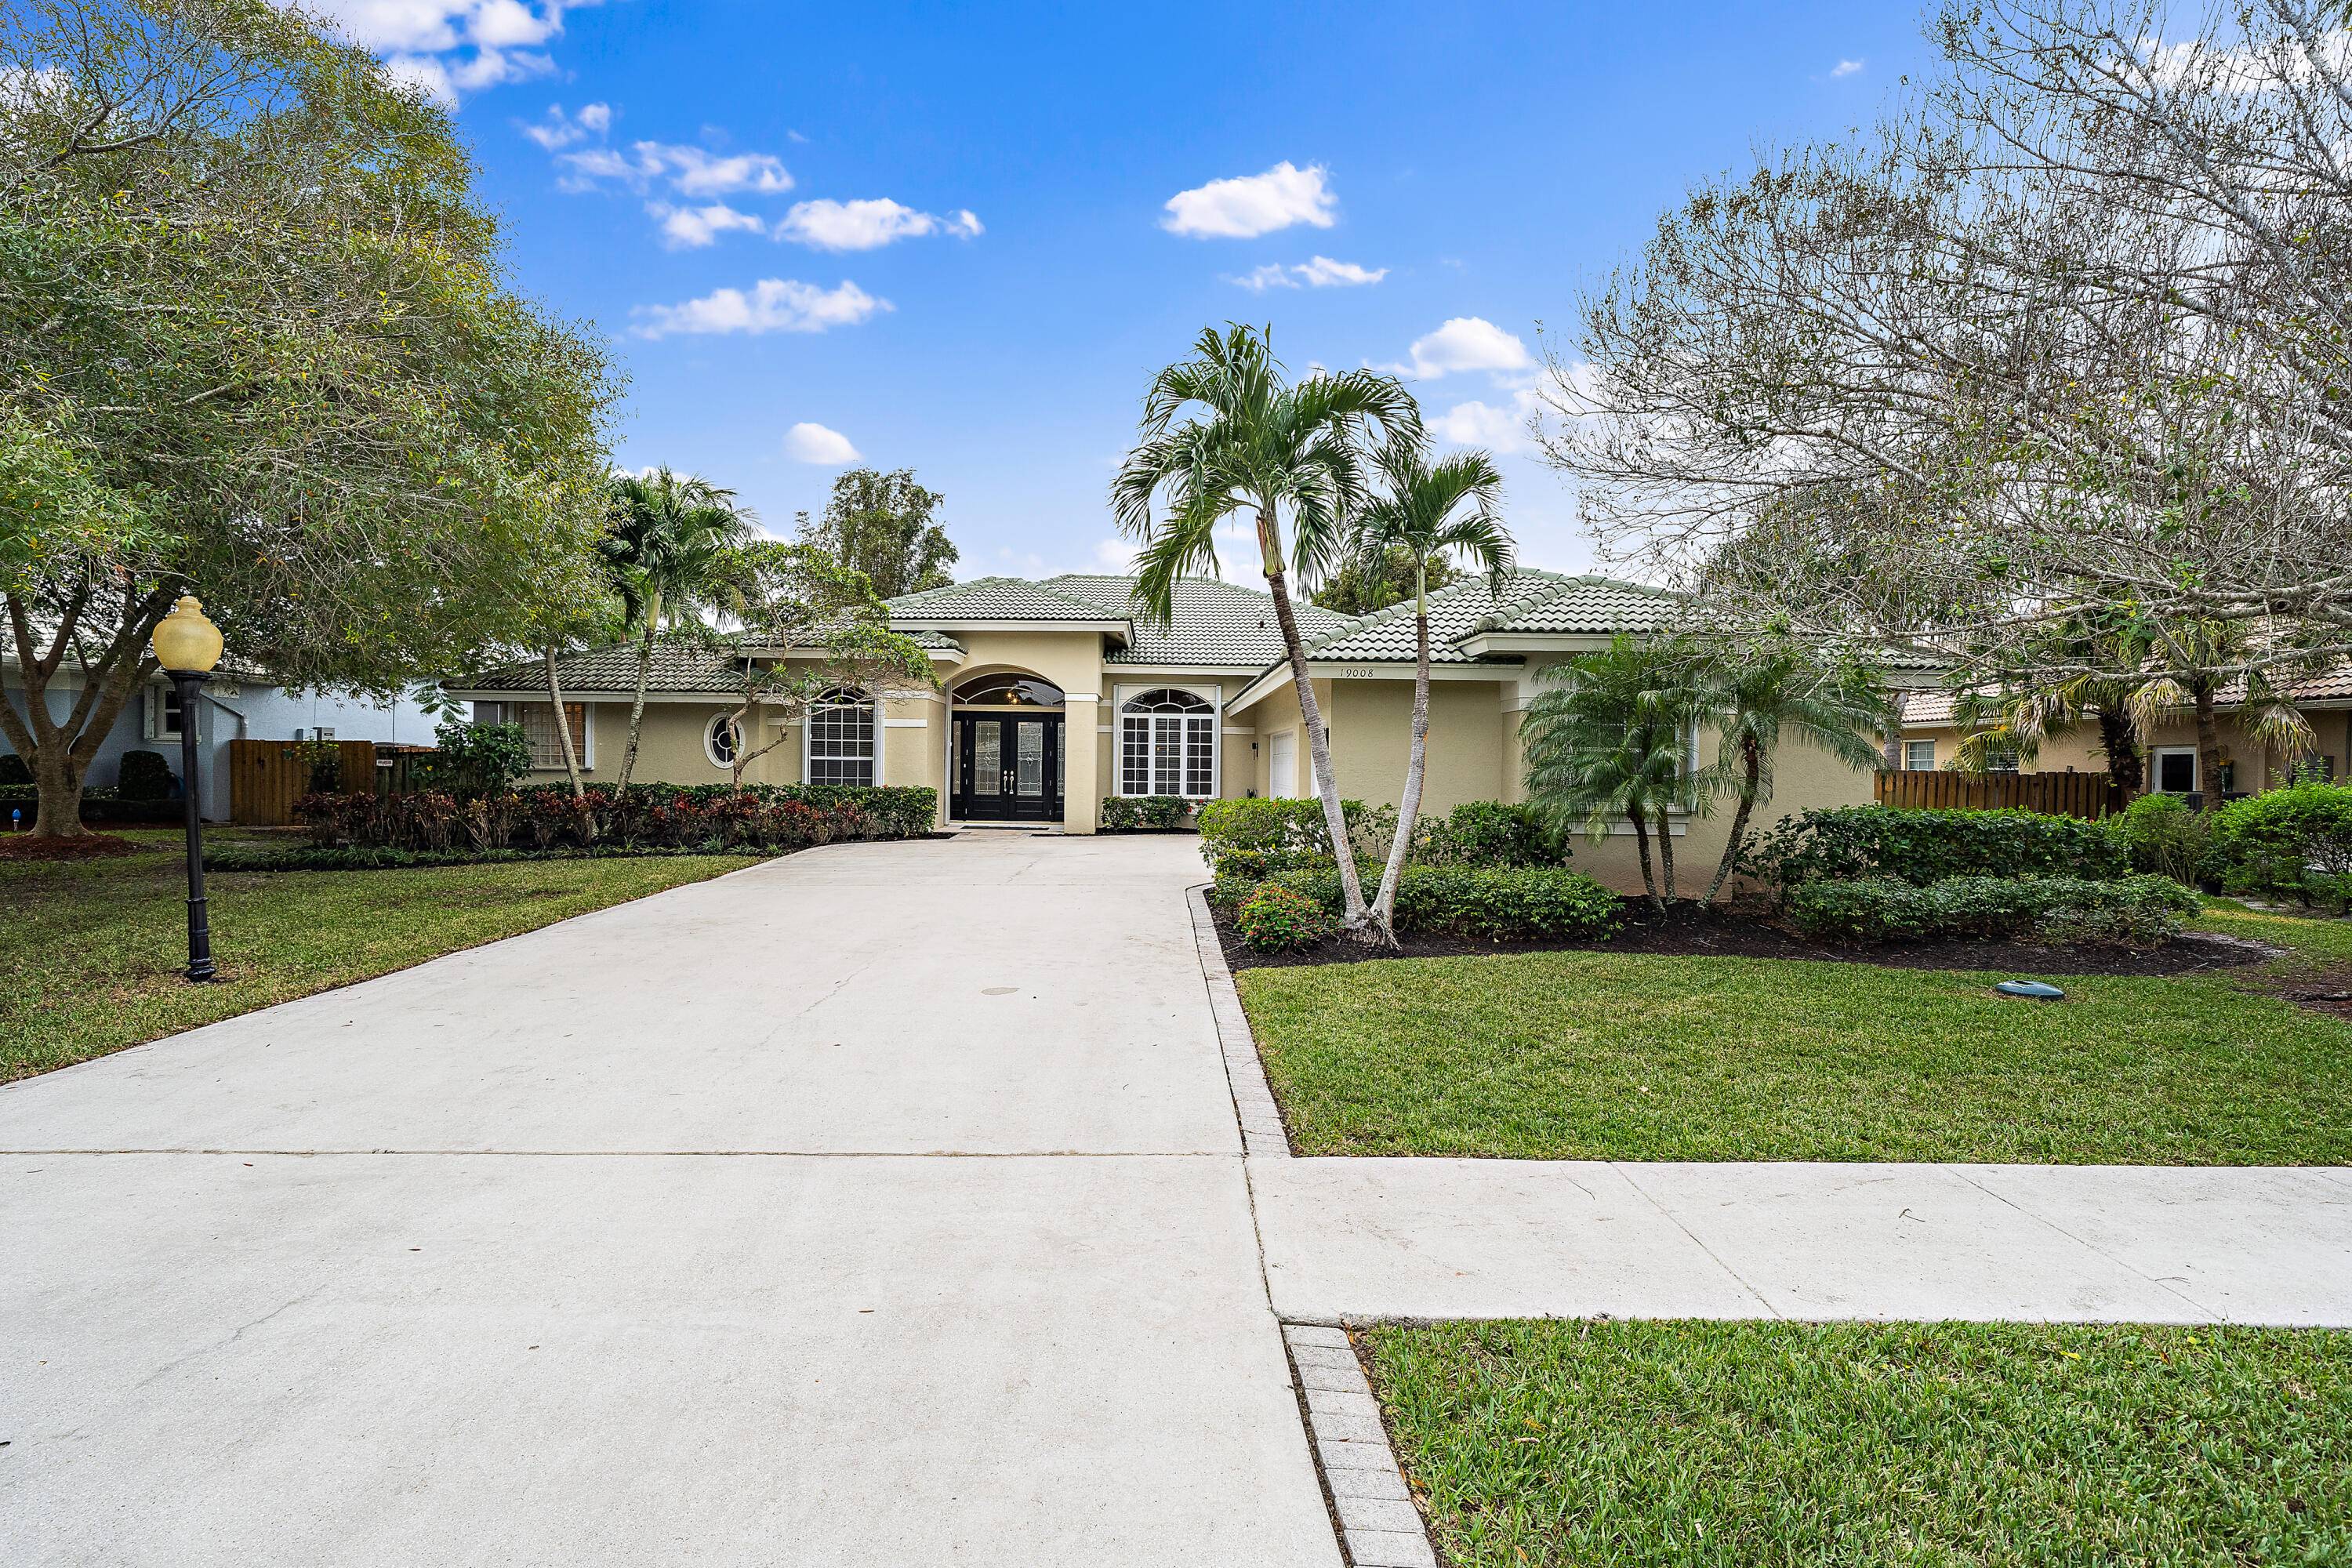 This 4 bedroom, 3. 5 bathroom home with a private screened in pool is located on a quiet sidestreet in the very desirable Moorings neighborhood in North Jupiter.